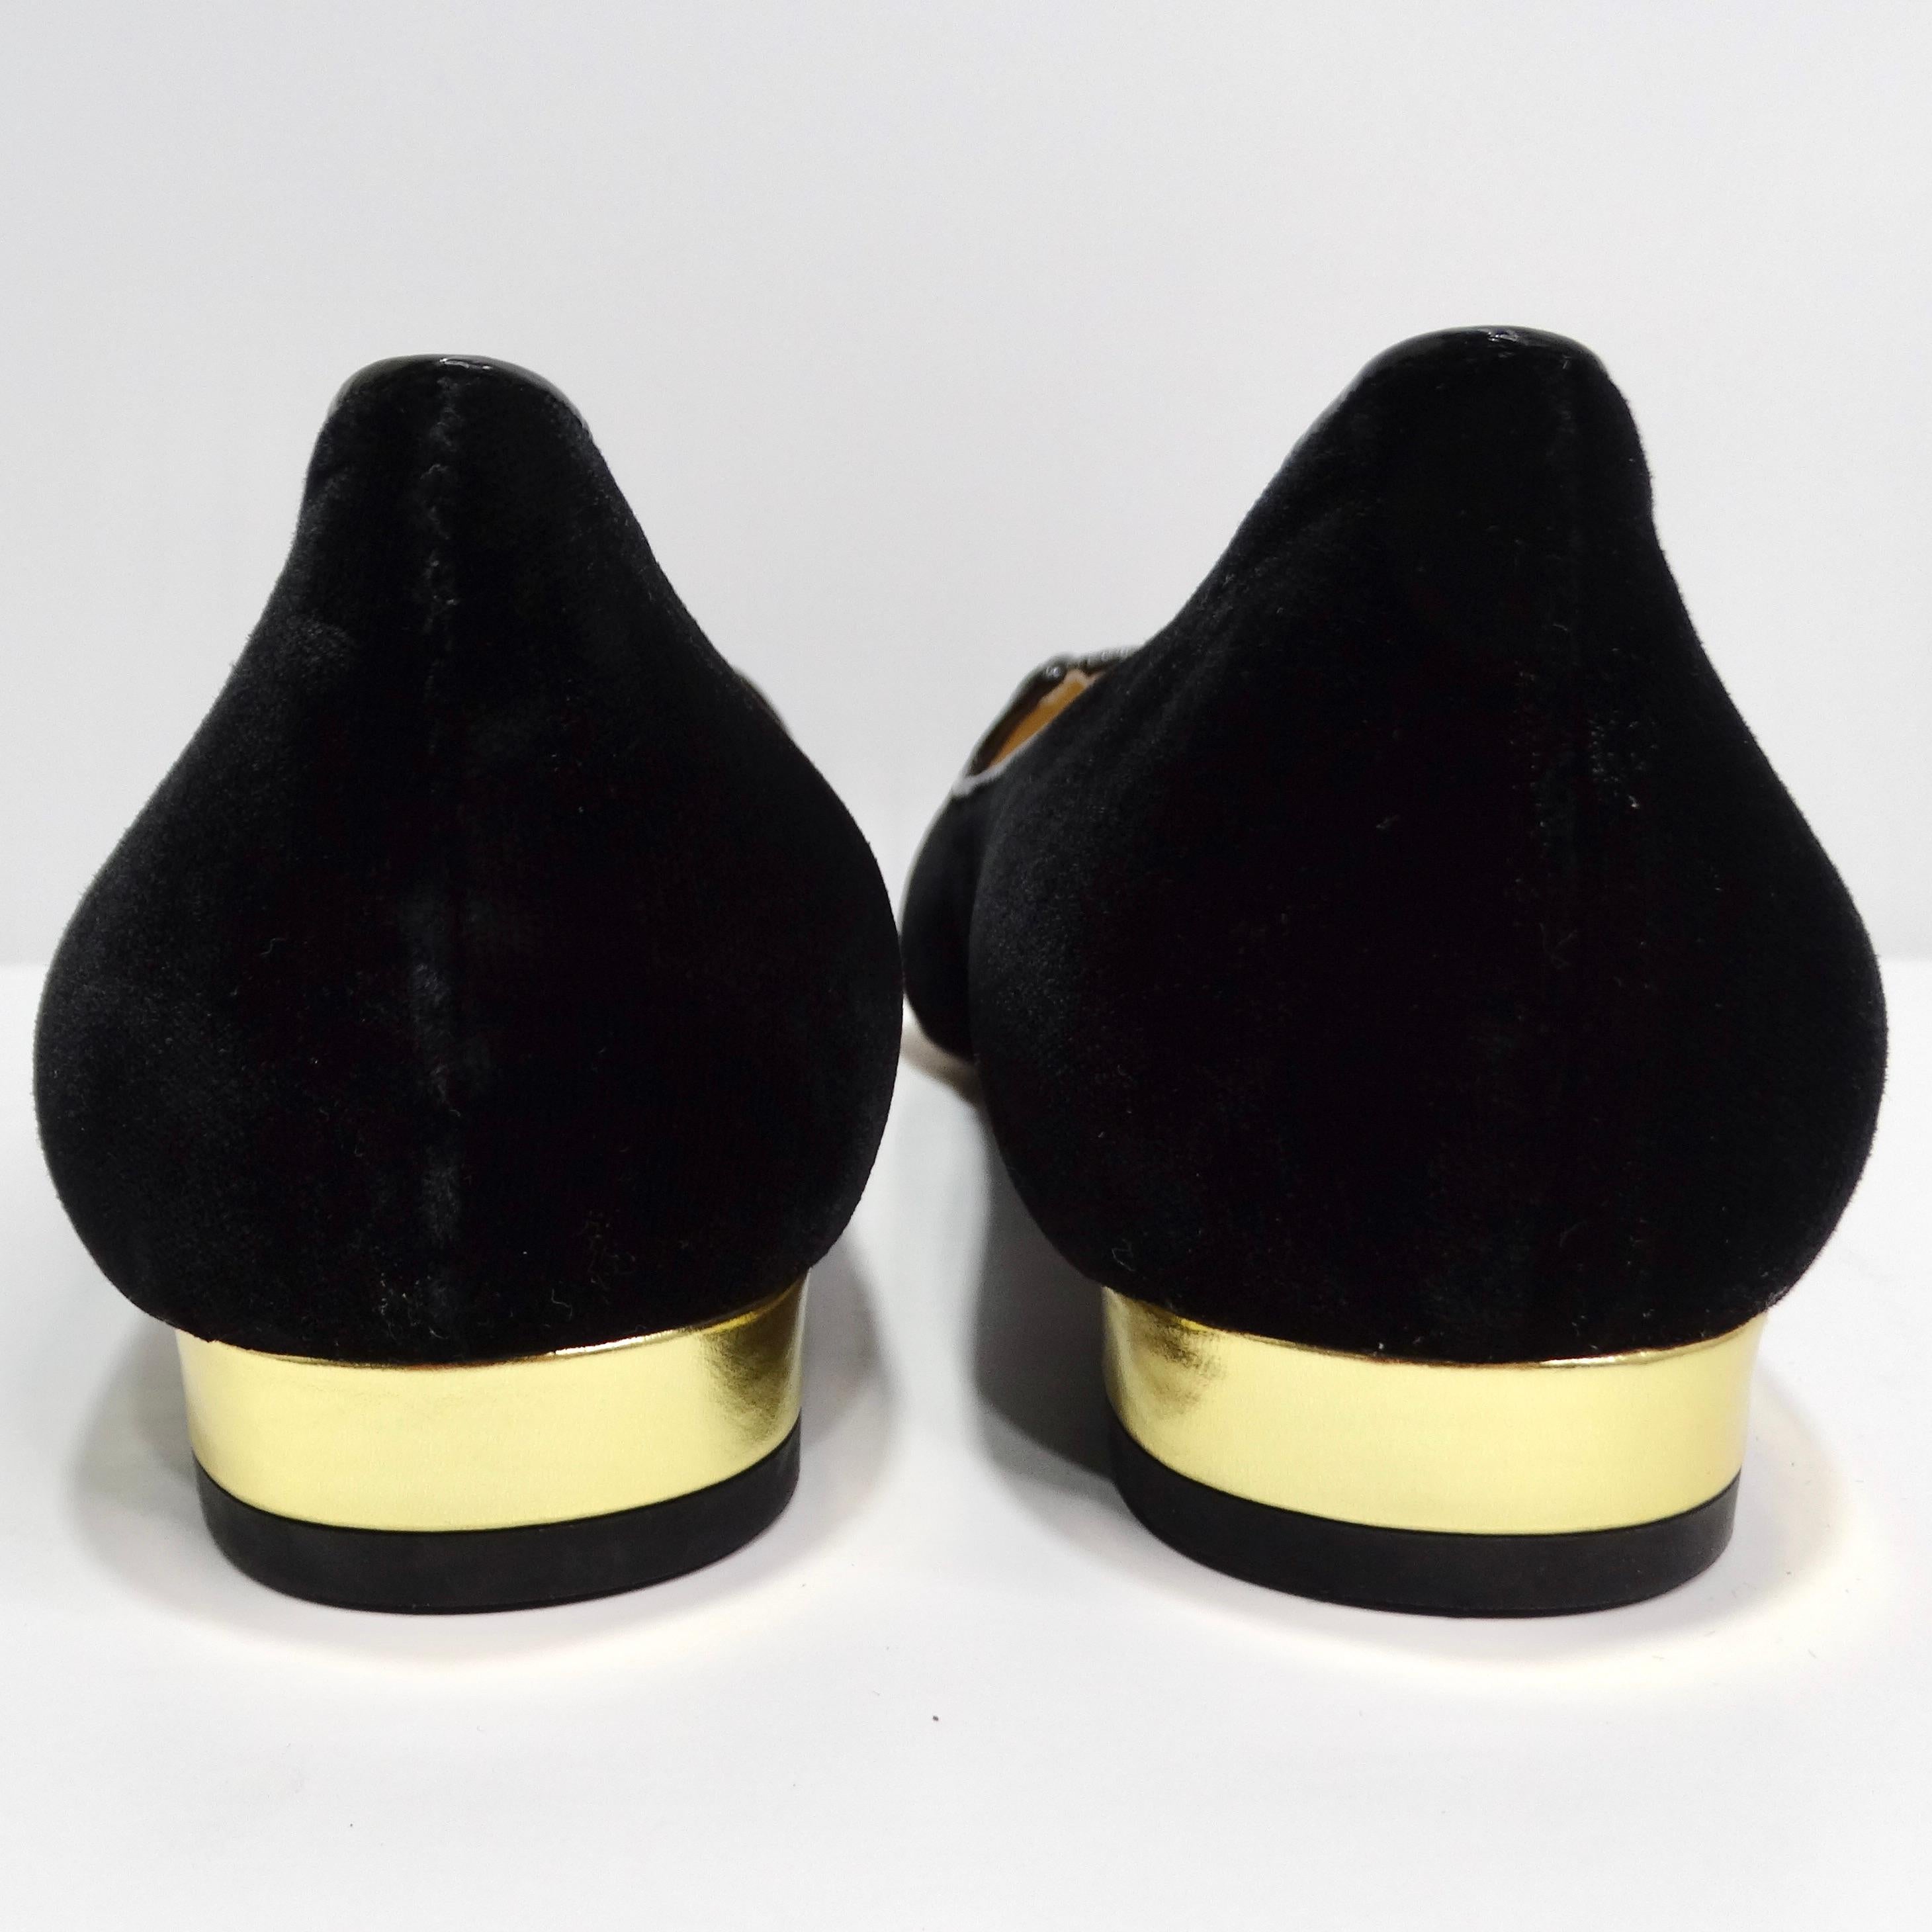 Charlotte Olympia - Chausssures brodées signées Kitty en vente 3